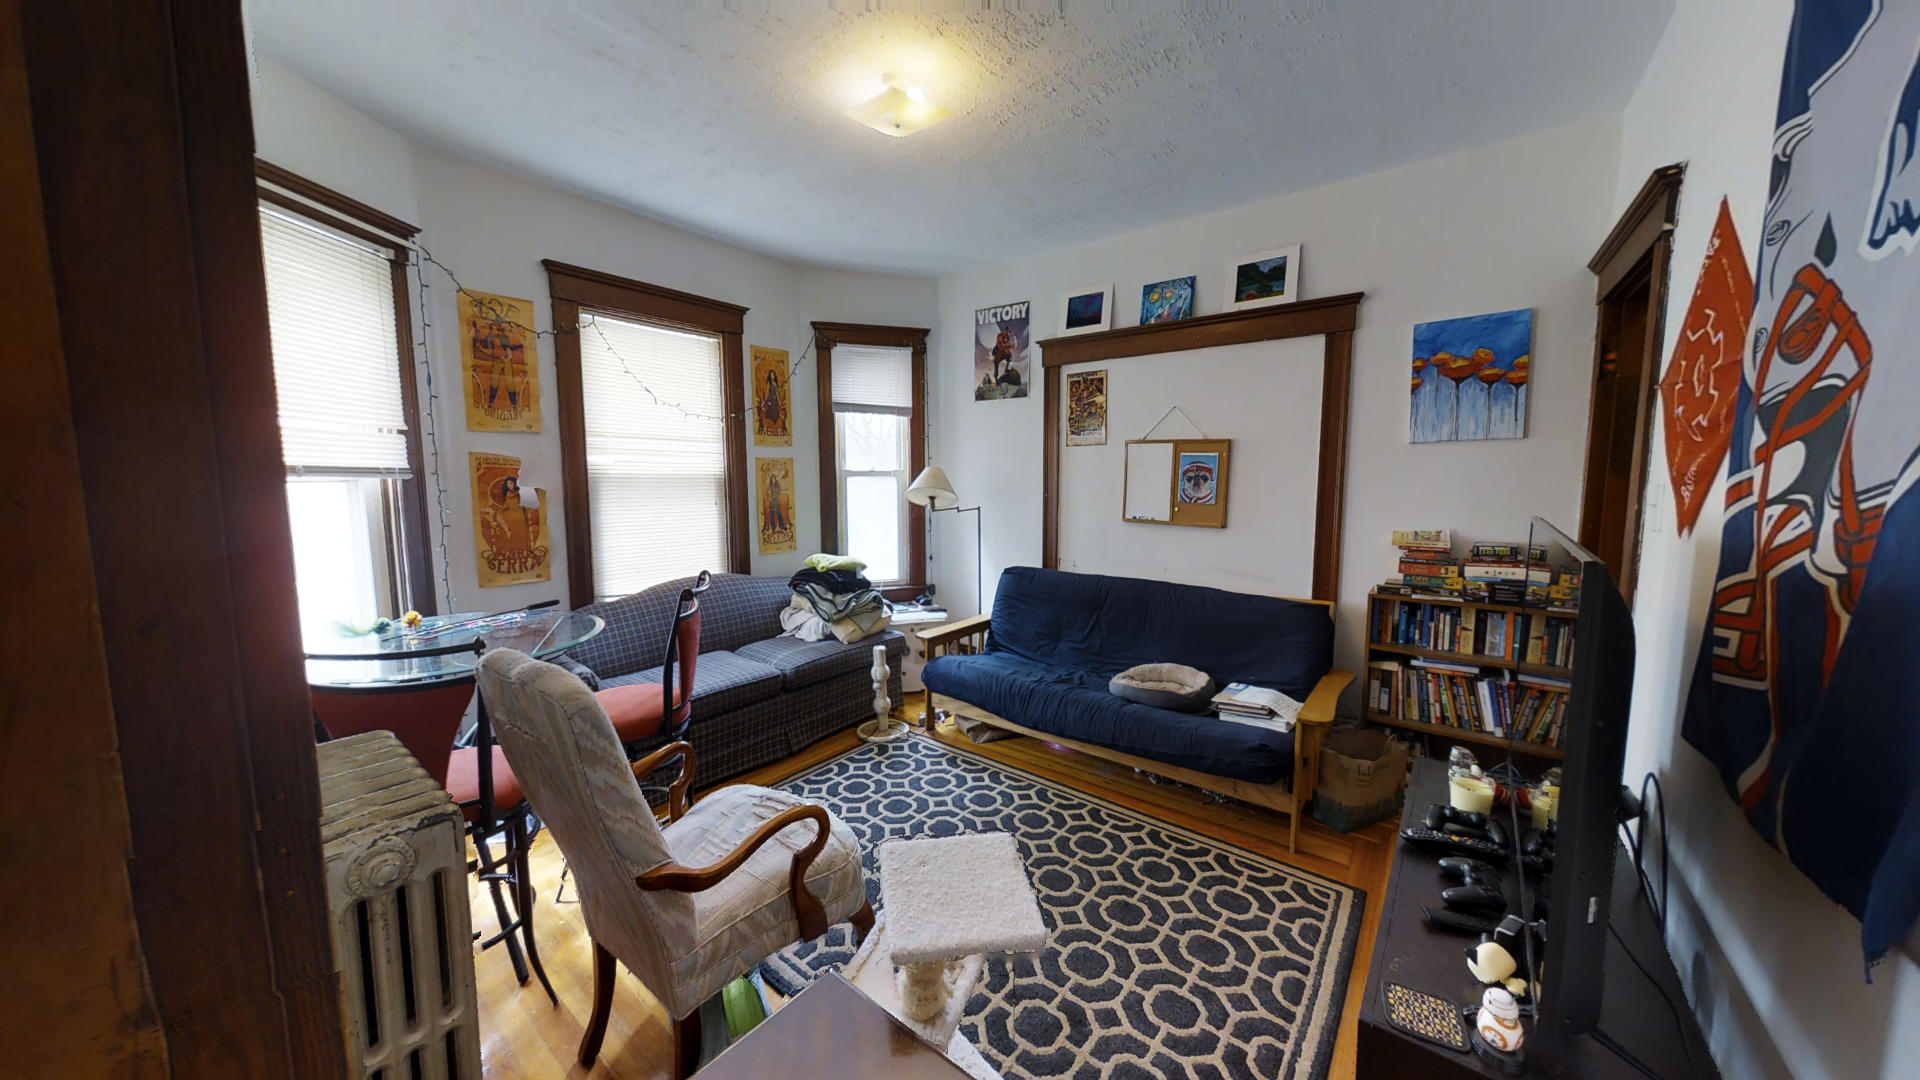 Photos of apartment on Cameron Ave.,Somerville MA 02144